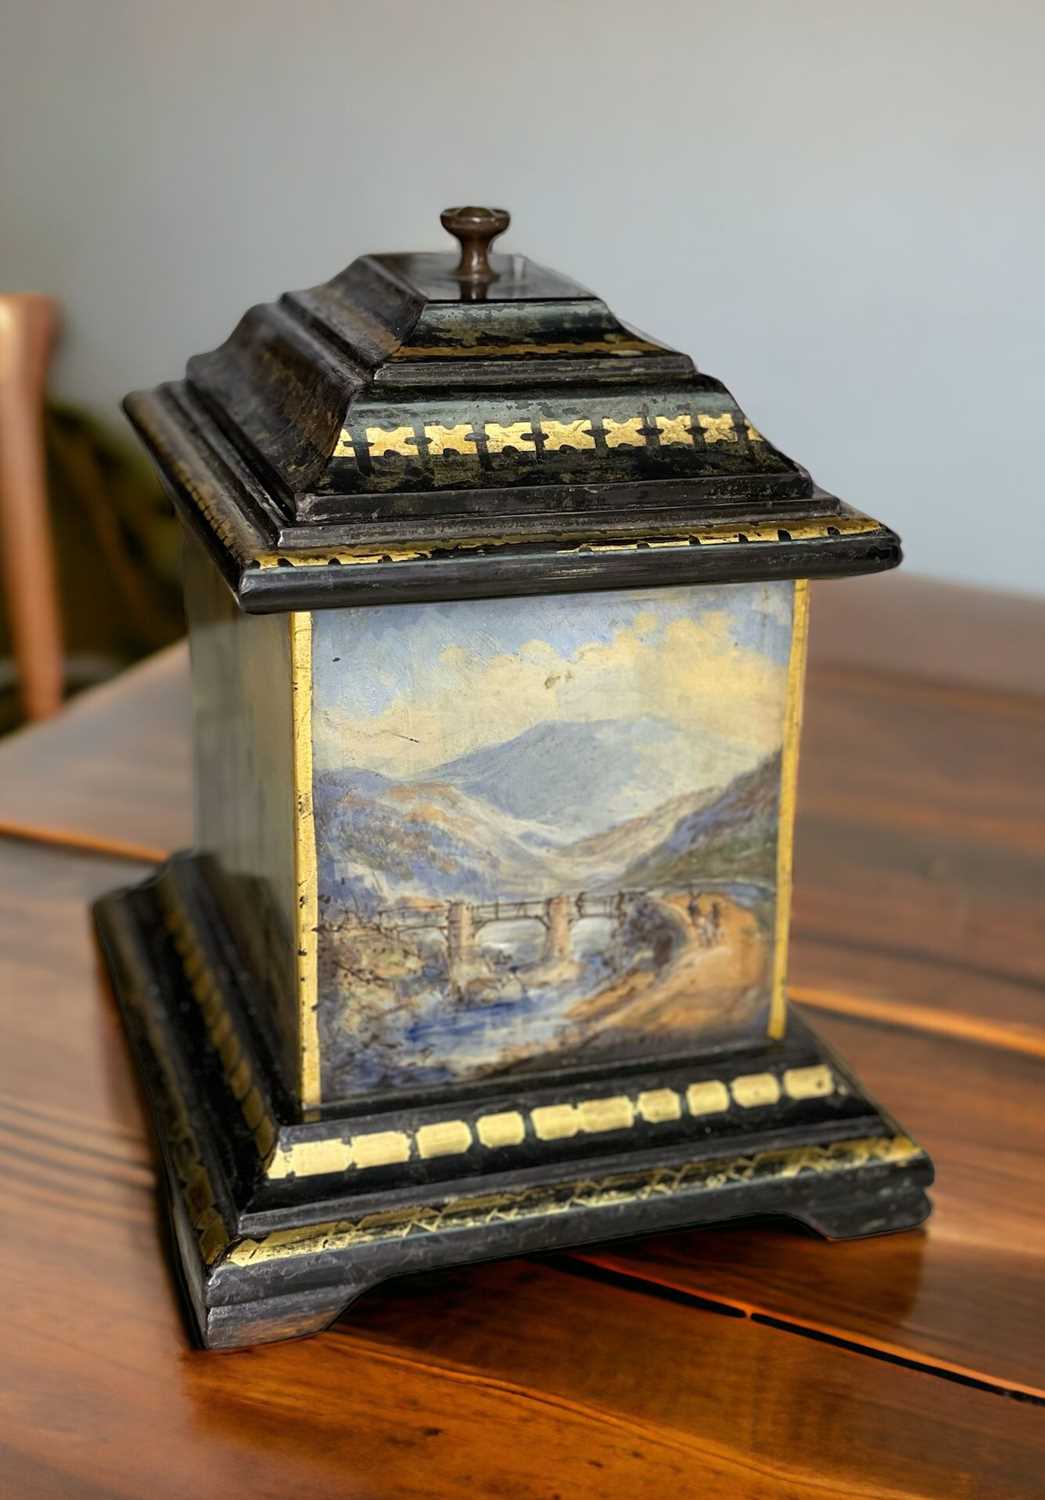 WELSH FOLK ART SLATE TEA CADDY circa 1850, with four hand-painted panels depicting north Wales - Image 3 of 6